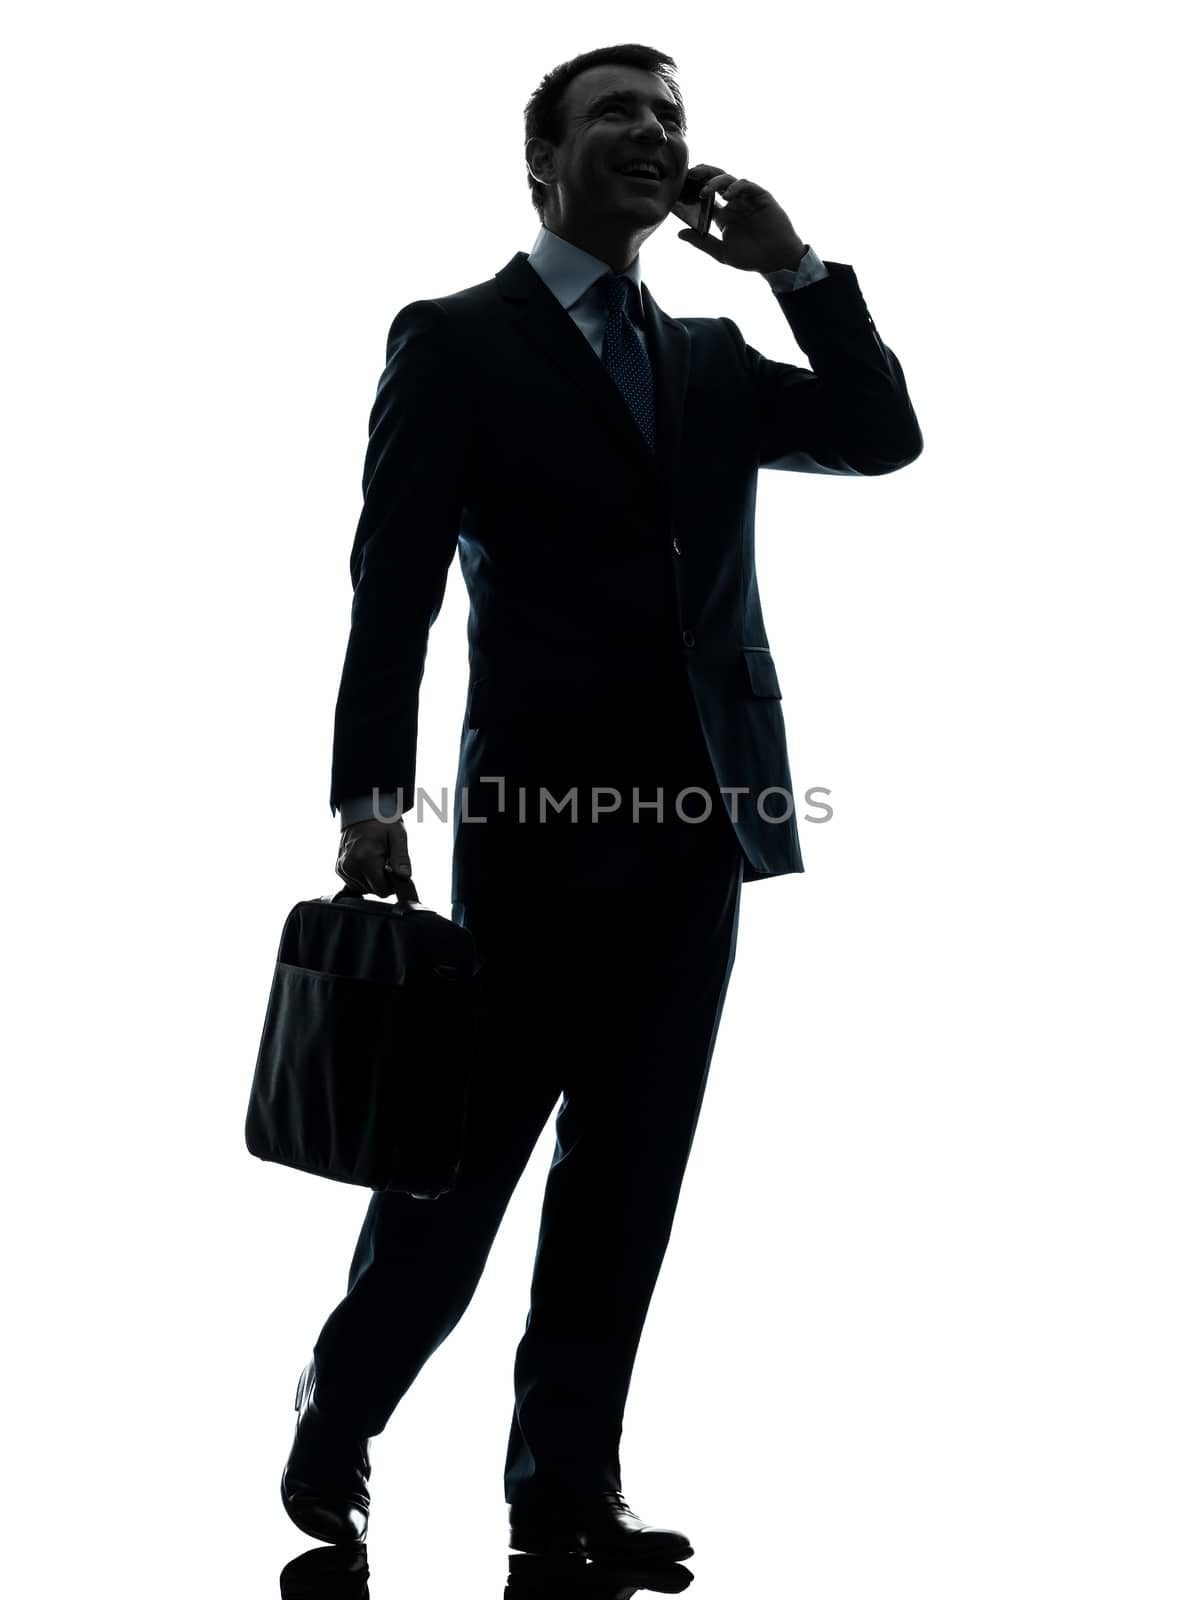 one caucasian businessman walking on the telephone in silhouette studio isolated on white background